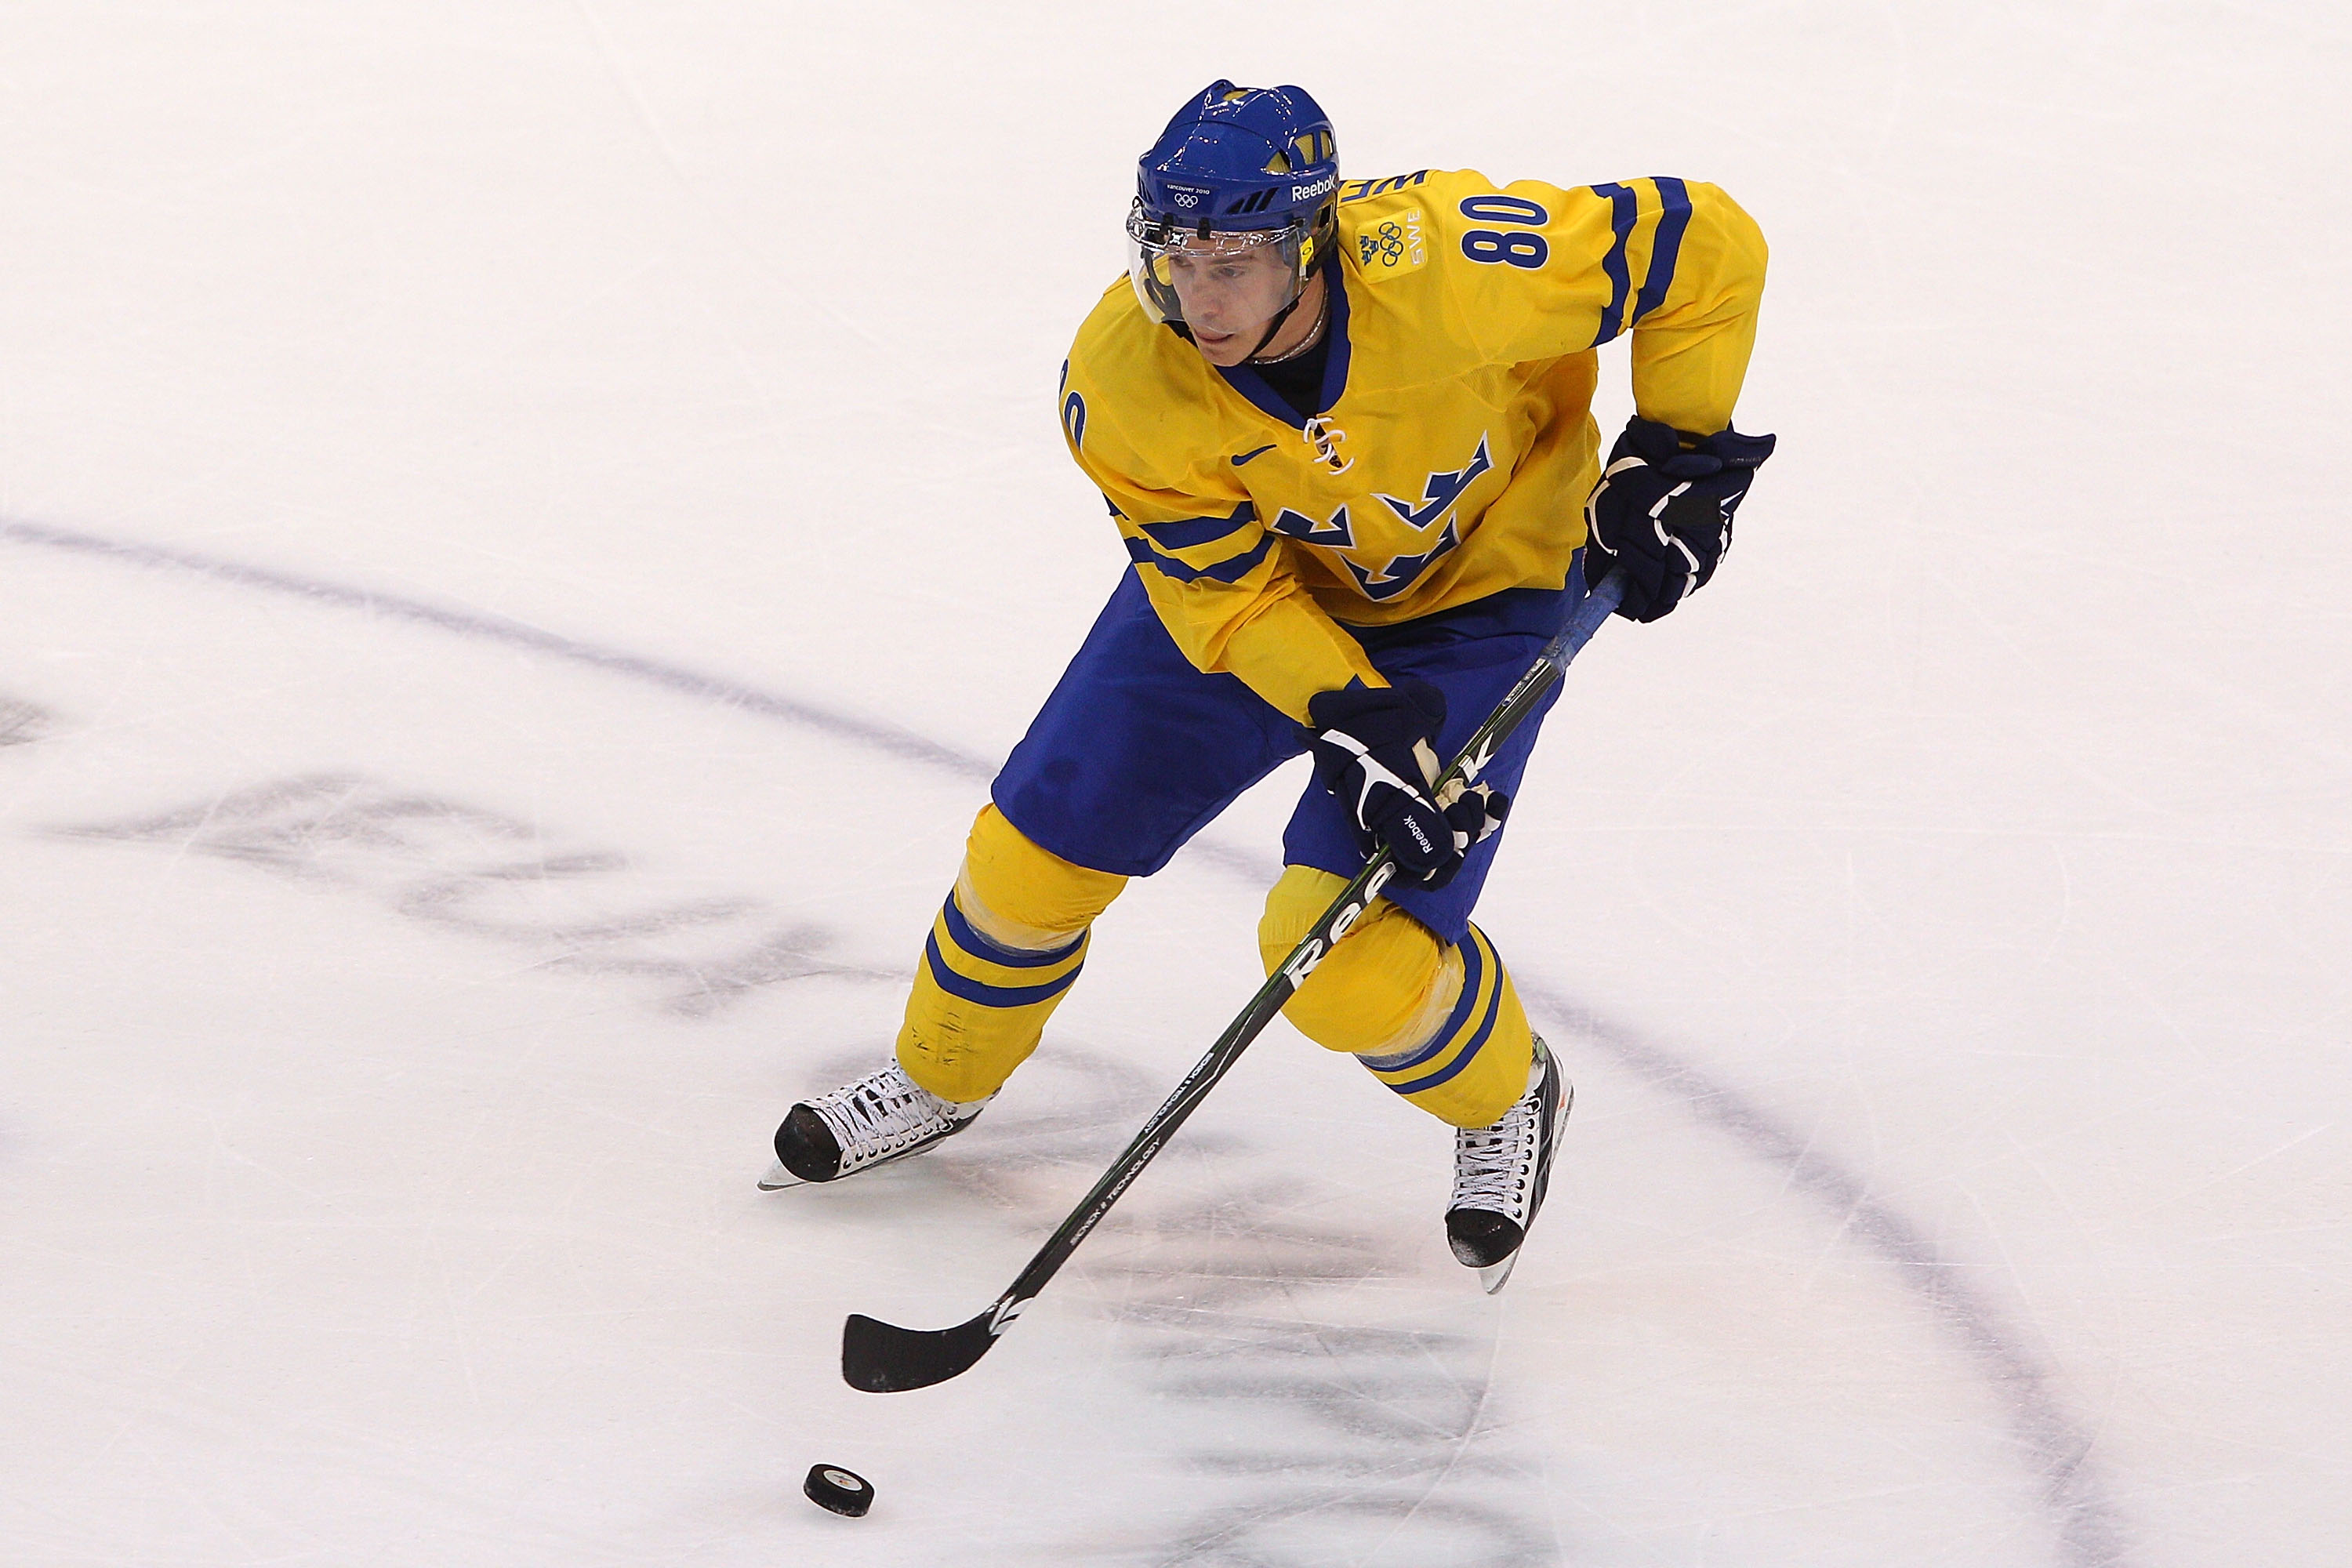 Super Swedes: The 10 Best Swedish Hockey Players of All Time